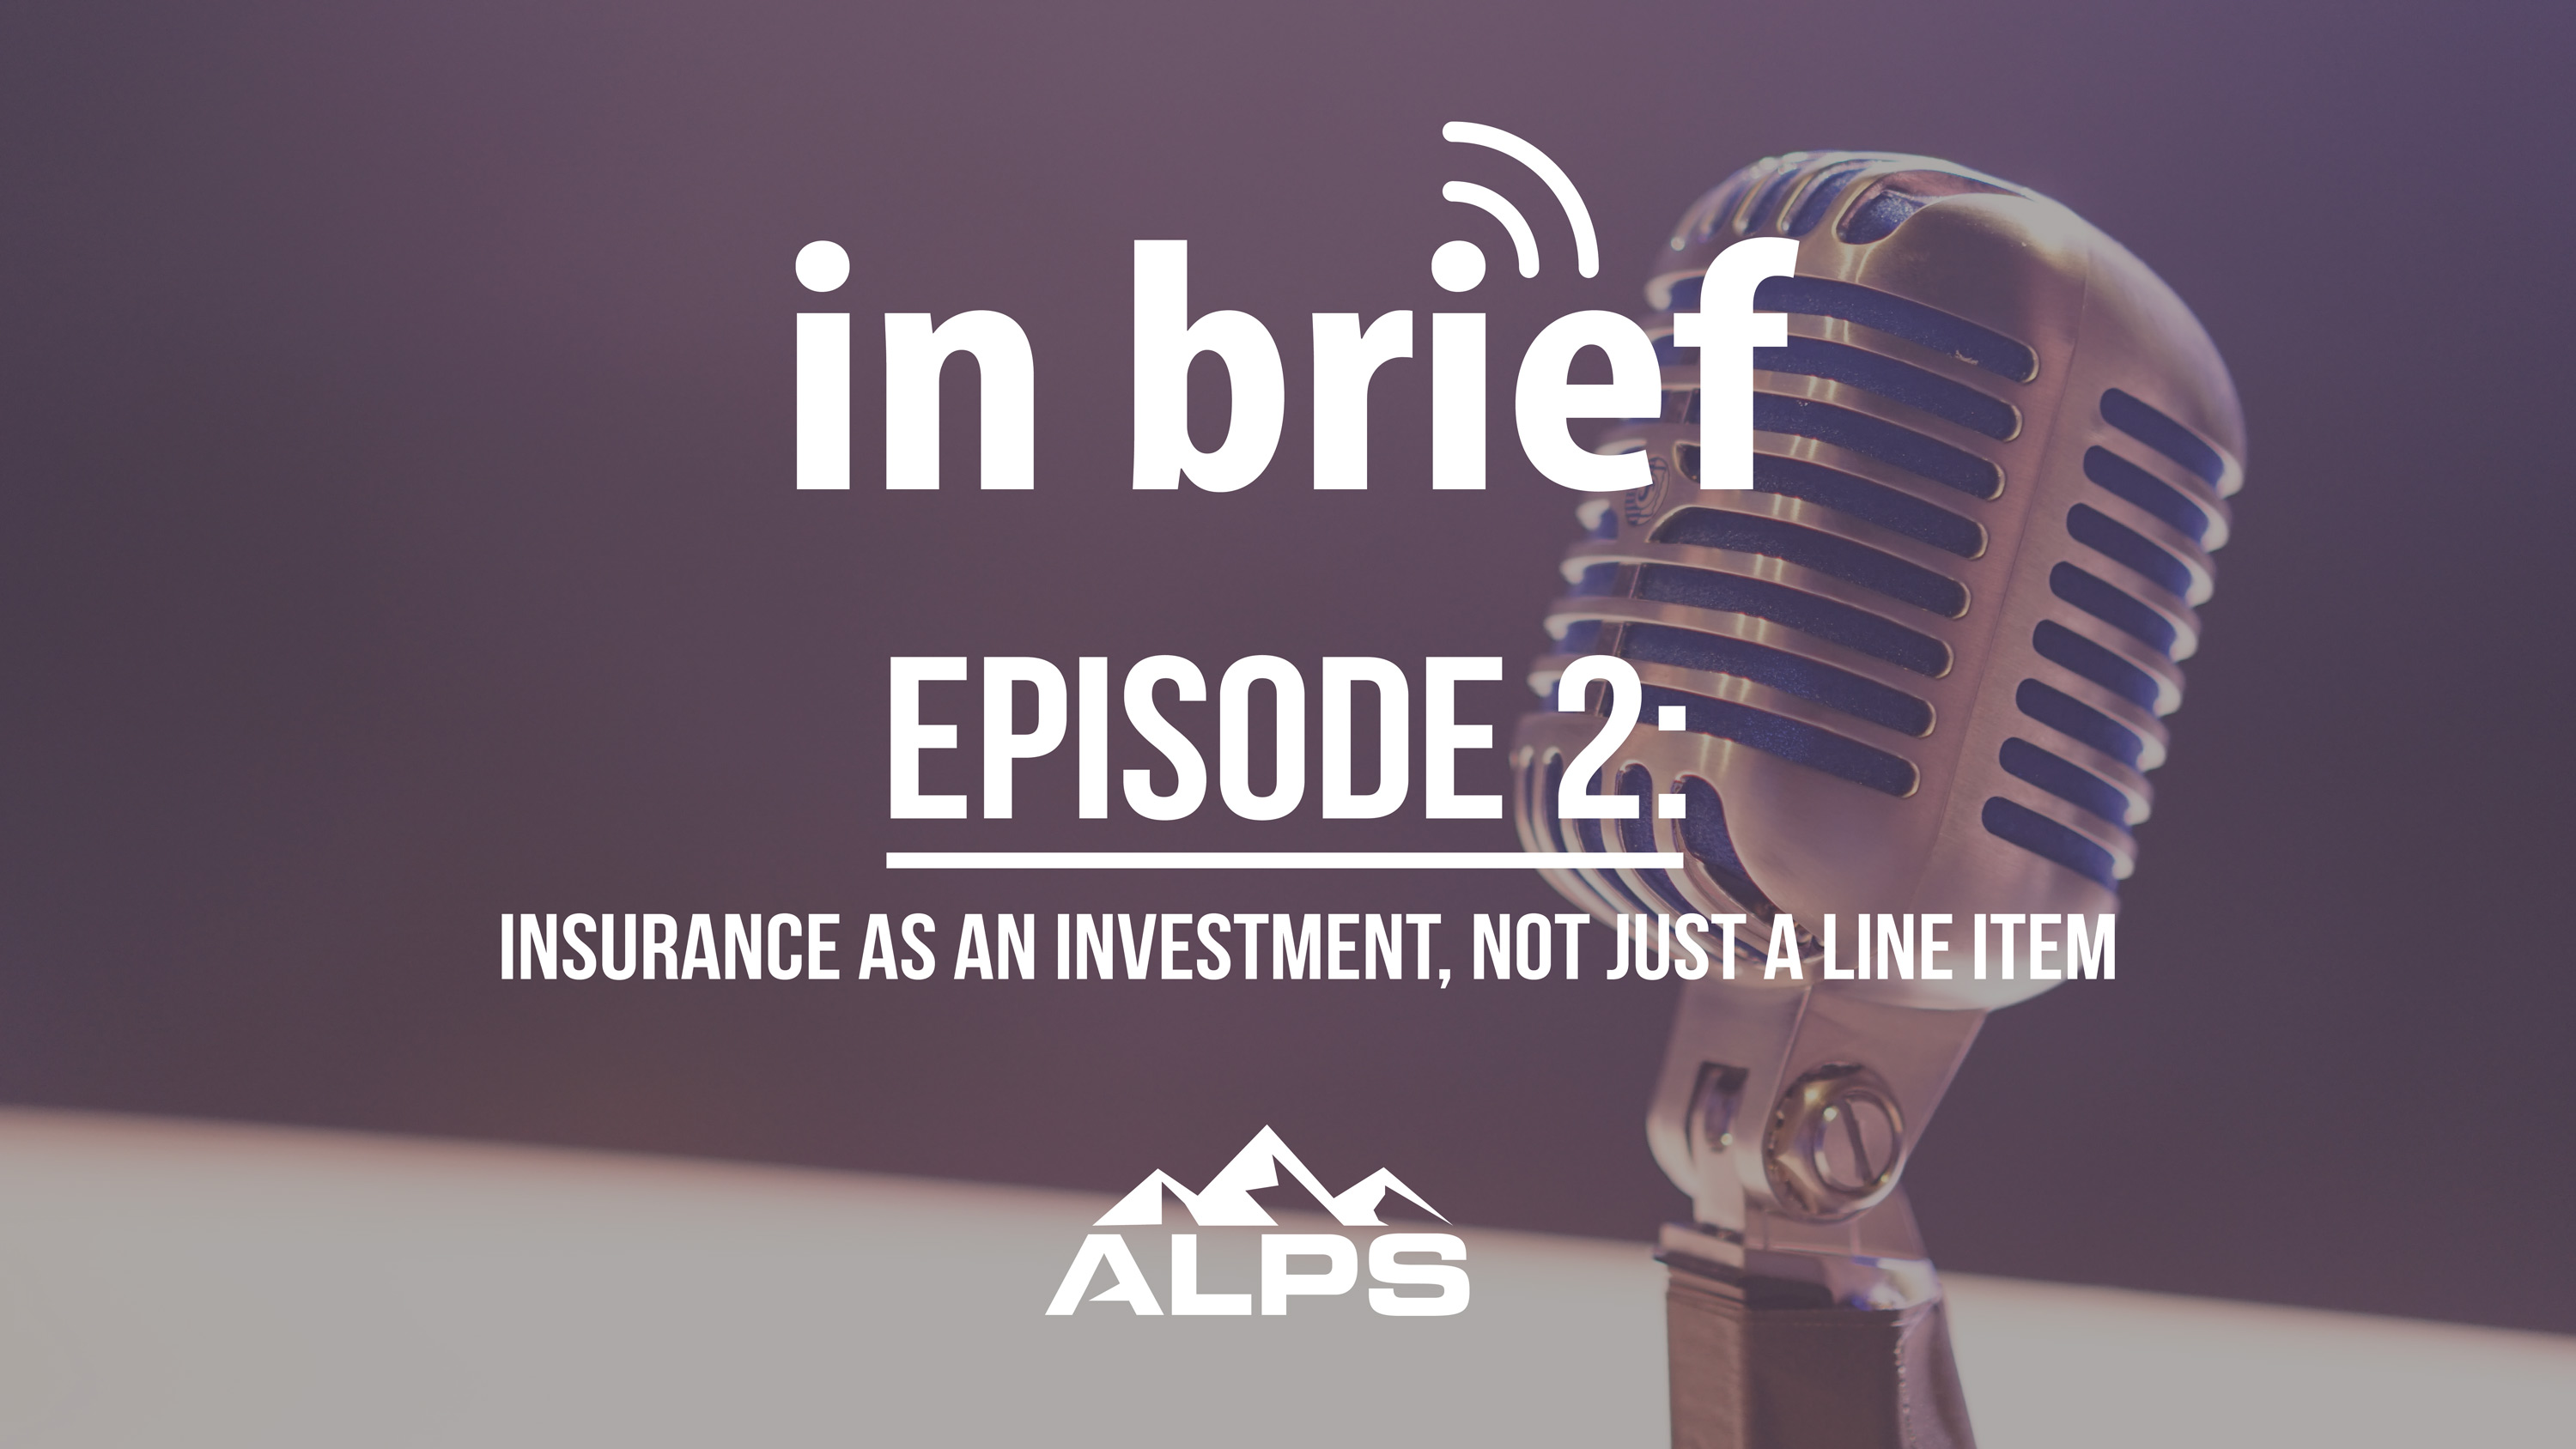 ALPS In Brief Podcast-Episode 2: Insurance as an Investment, Not Just a Line Item